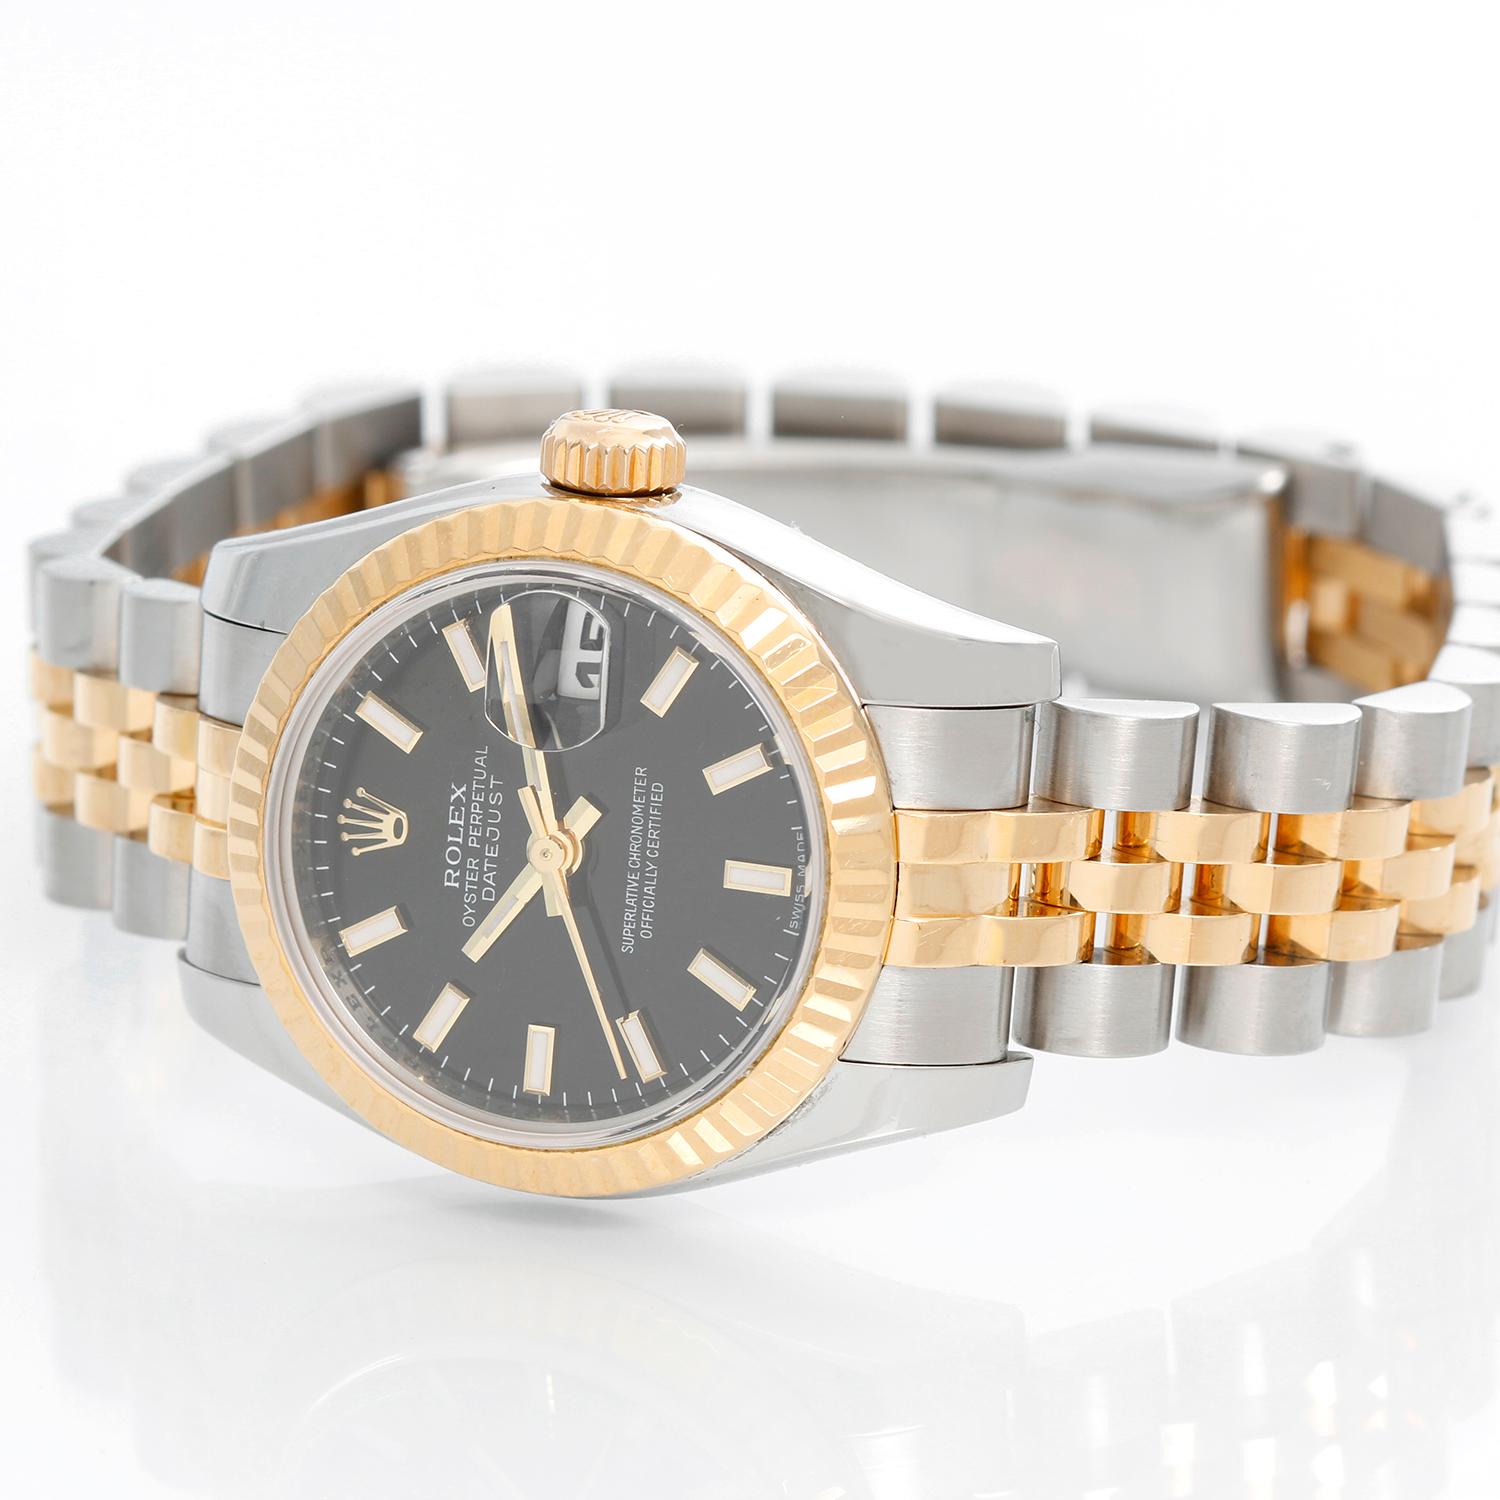 Rolex Ladies Datejust 2-Tone Jubilee Watch 179173 - Automatic winding, Quickset, 31 jewels, sapphire crystal. Stainless steel case with 18k yellow gold fluted bezel . Black dial with raised luminous hour markers . Stainless steel and 18k yellow gold